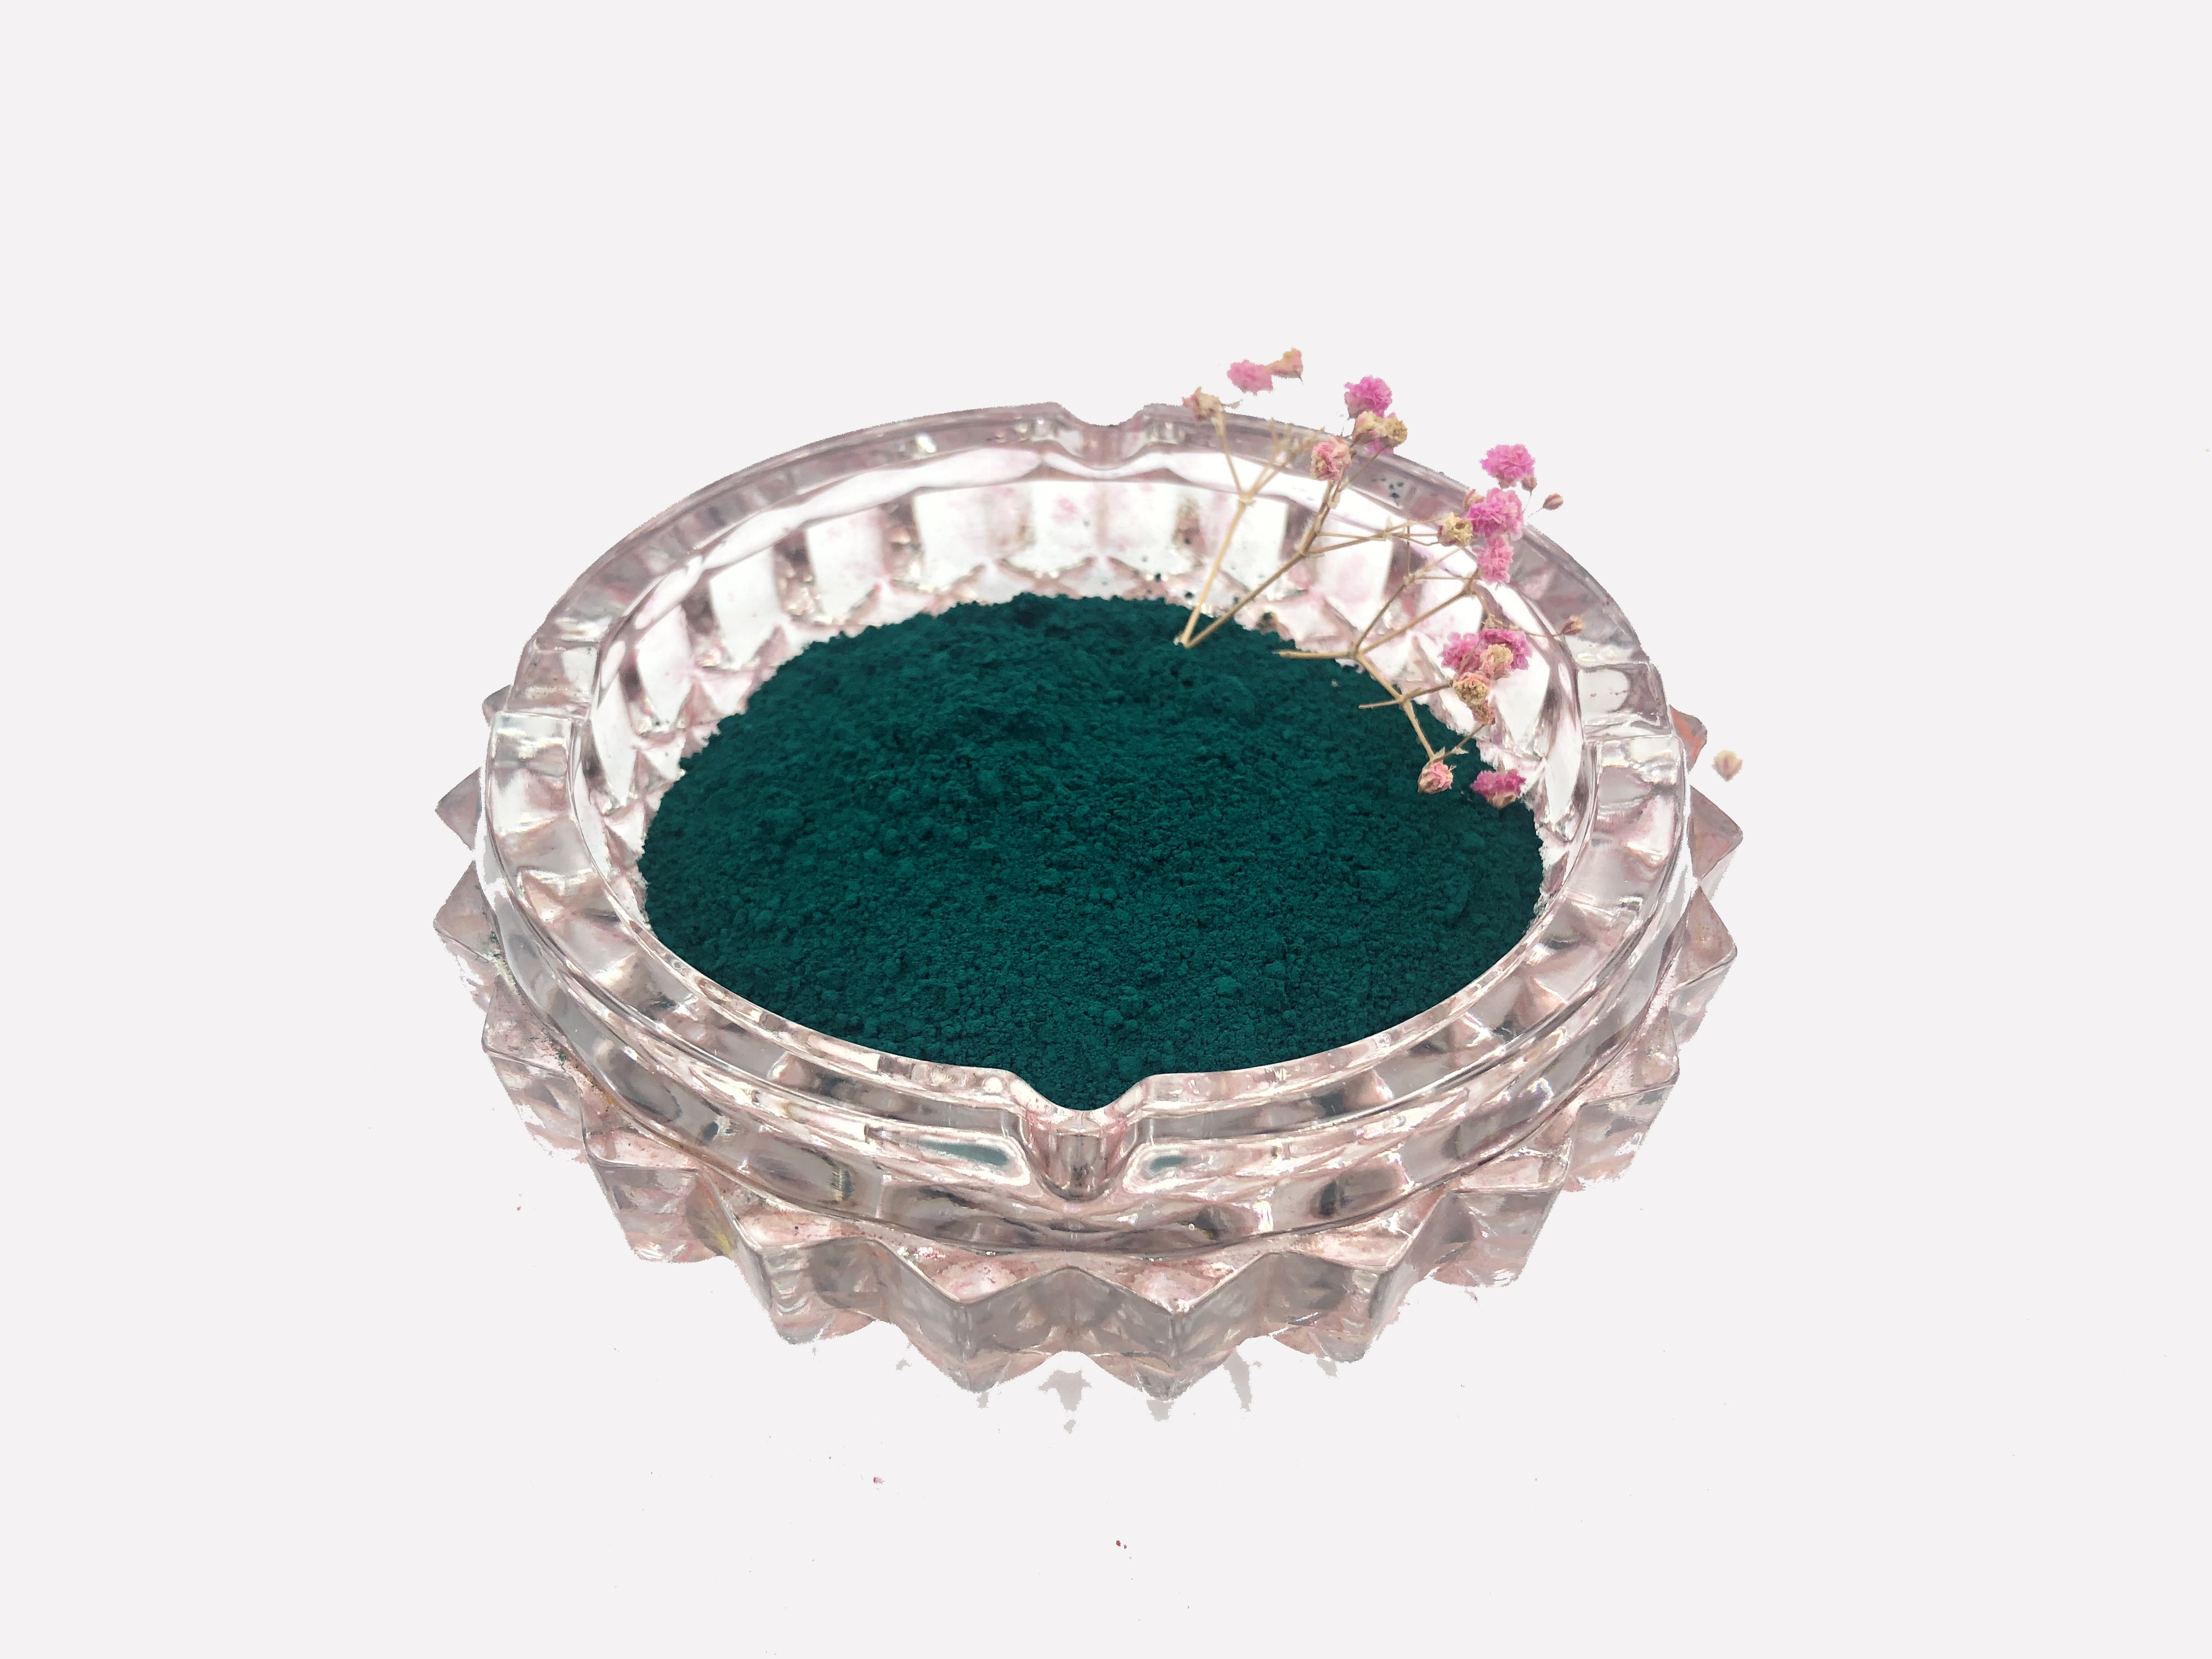 Green Colorant Mainly For Powder Coating Strong Tinting Strength with High Chemical Property 